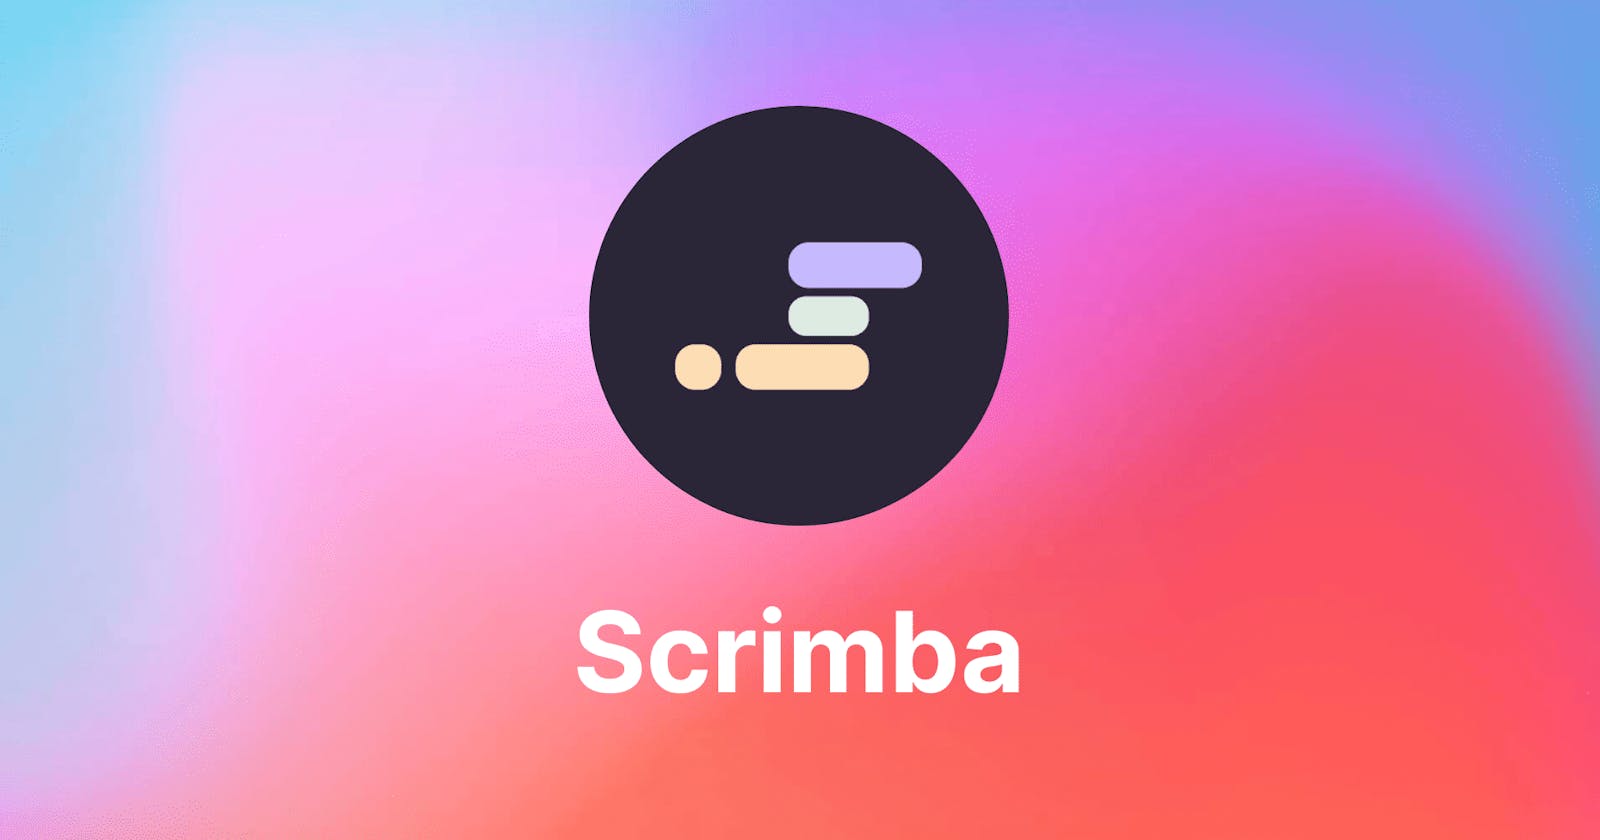 I completed Scrimba's free Javascript course as a coding noob... was it worth it?